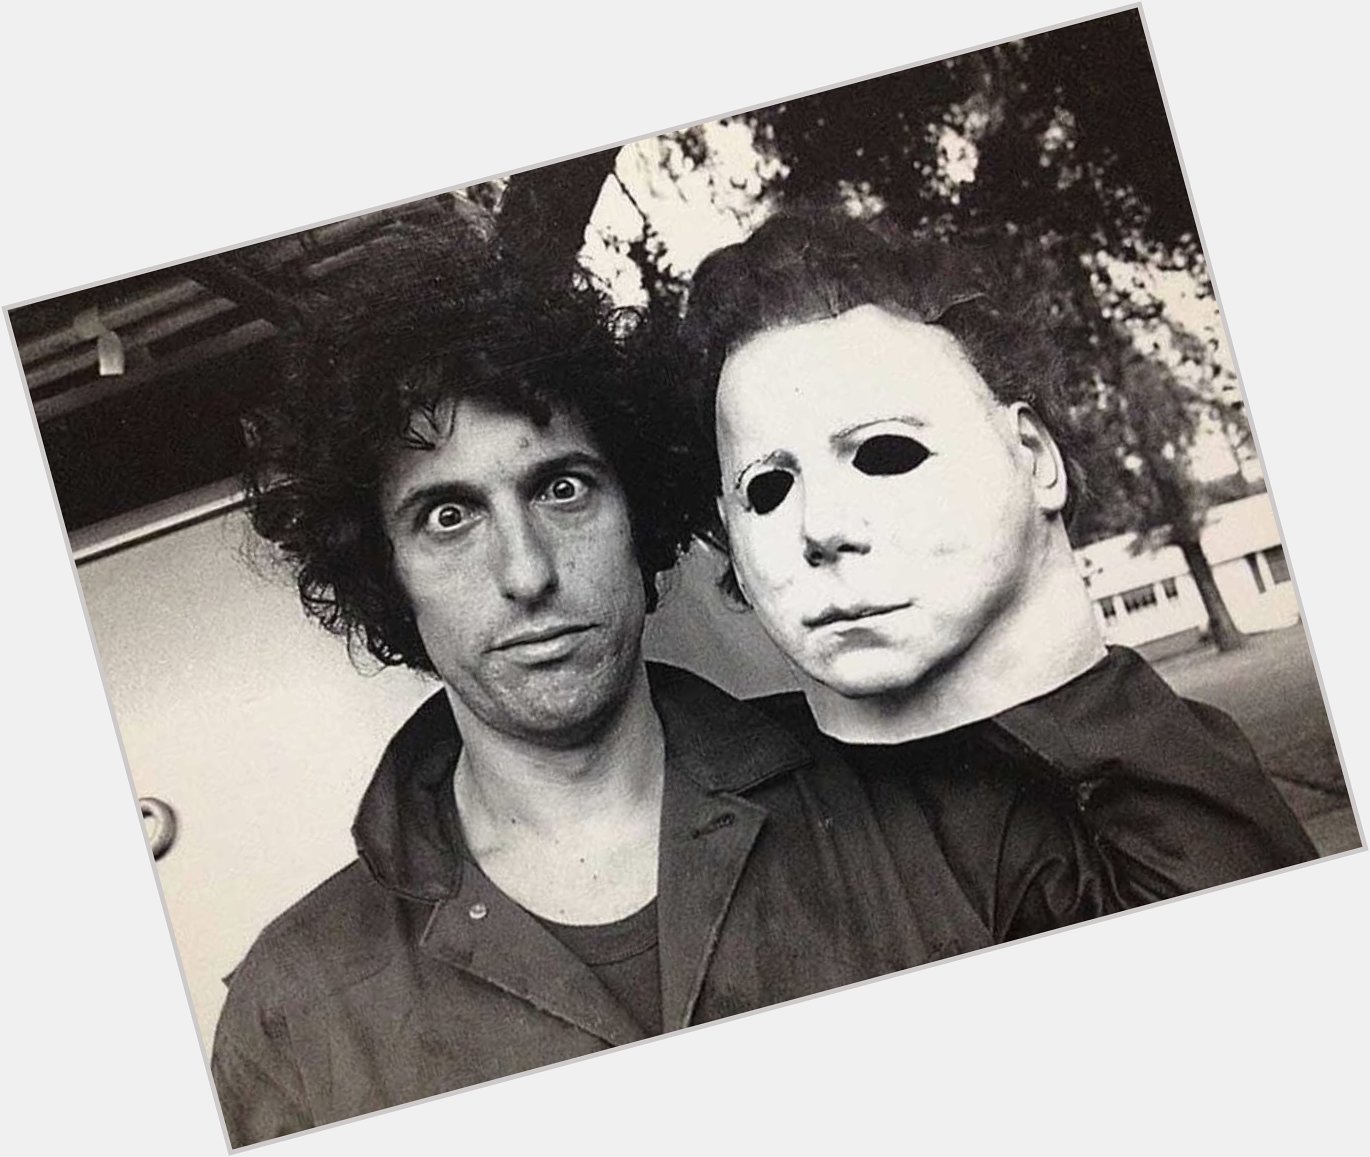 Happy birthday to the best Myers, Nick Castle.   